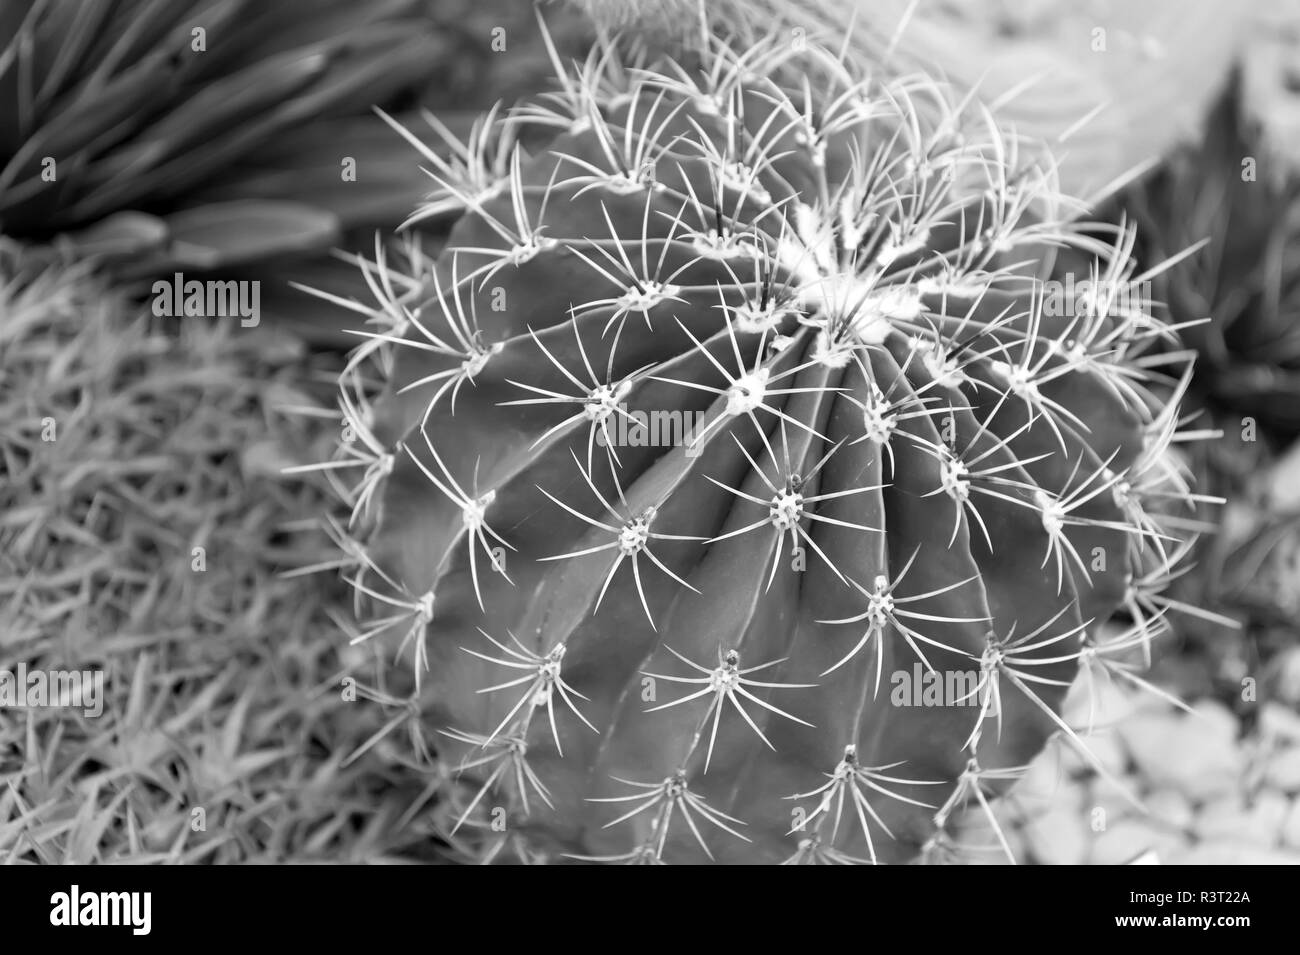 cactus flower of big round green plant with spiky thorns as natural background Stock Photo